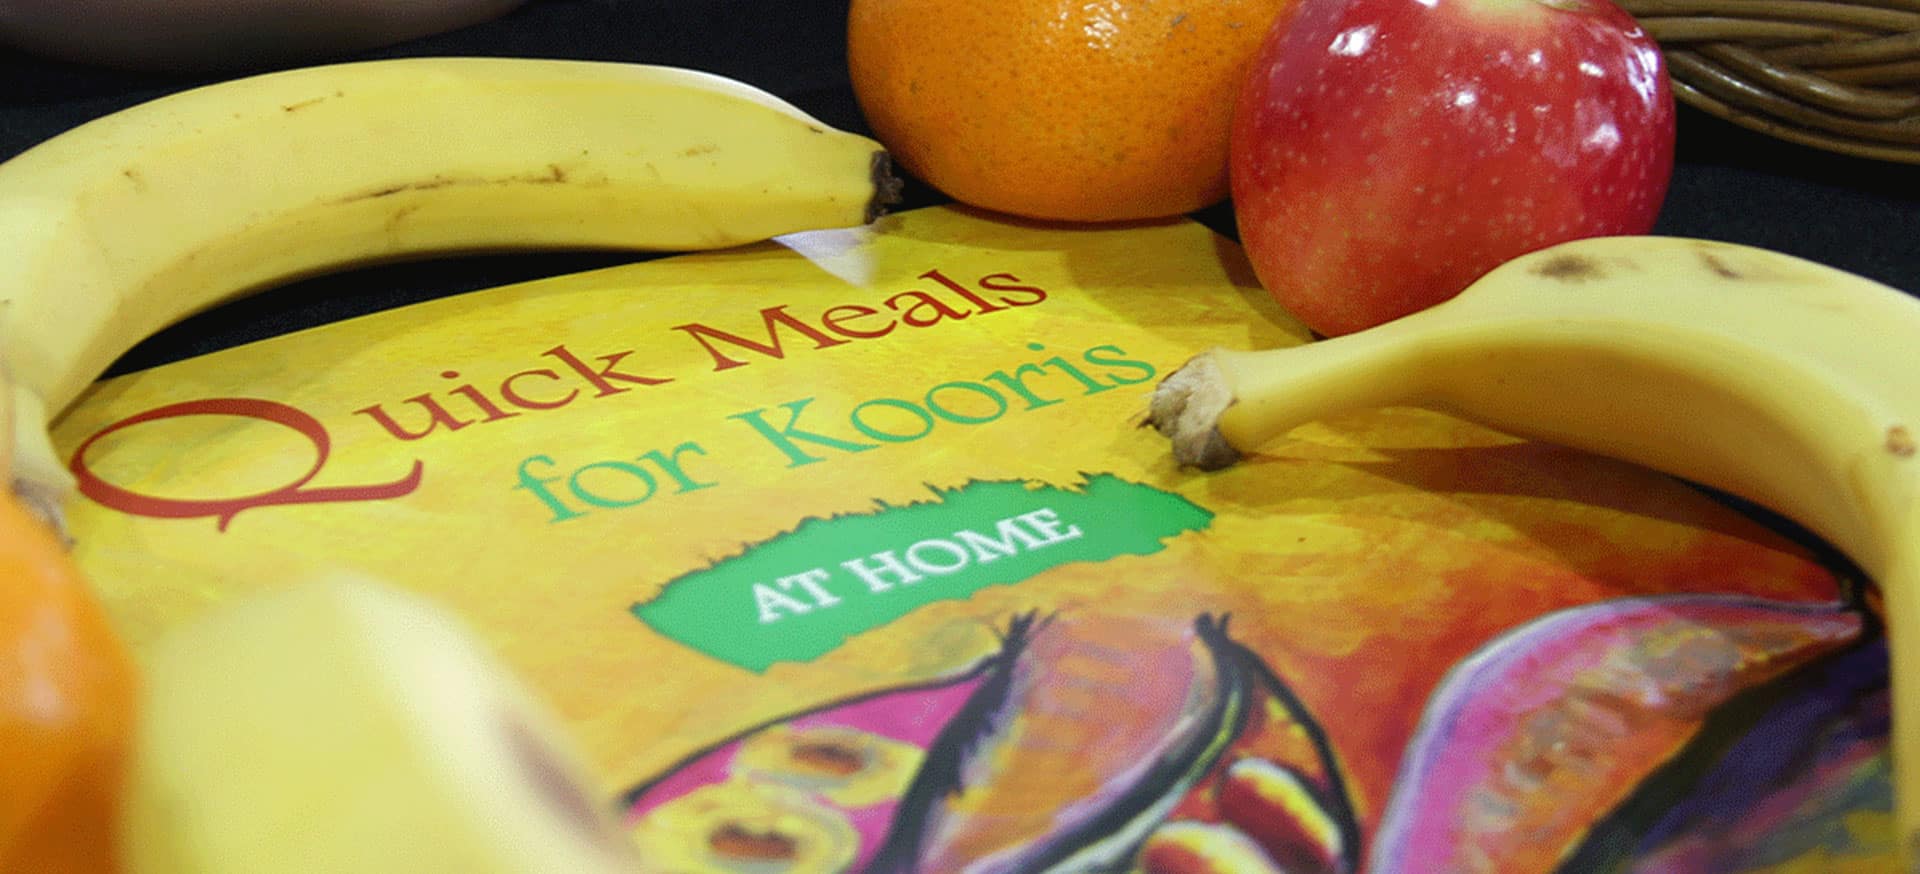 The Quick Meals for Kooris At Home manual with fruit laid on top.